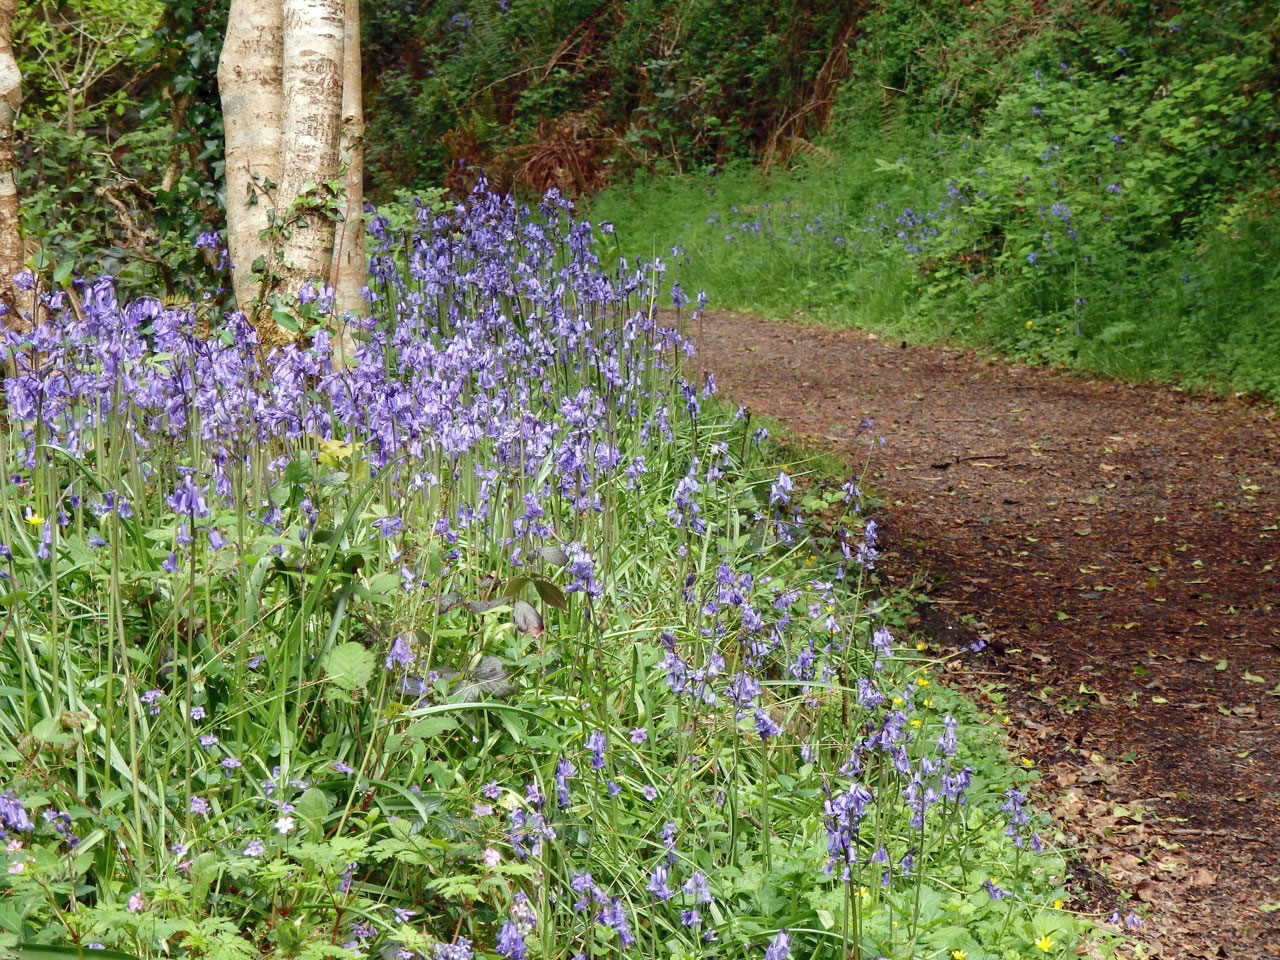 Bluebells lining the walls